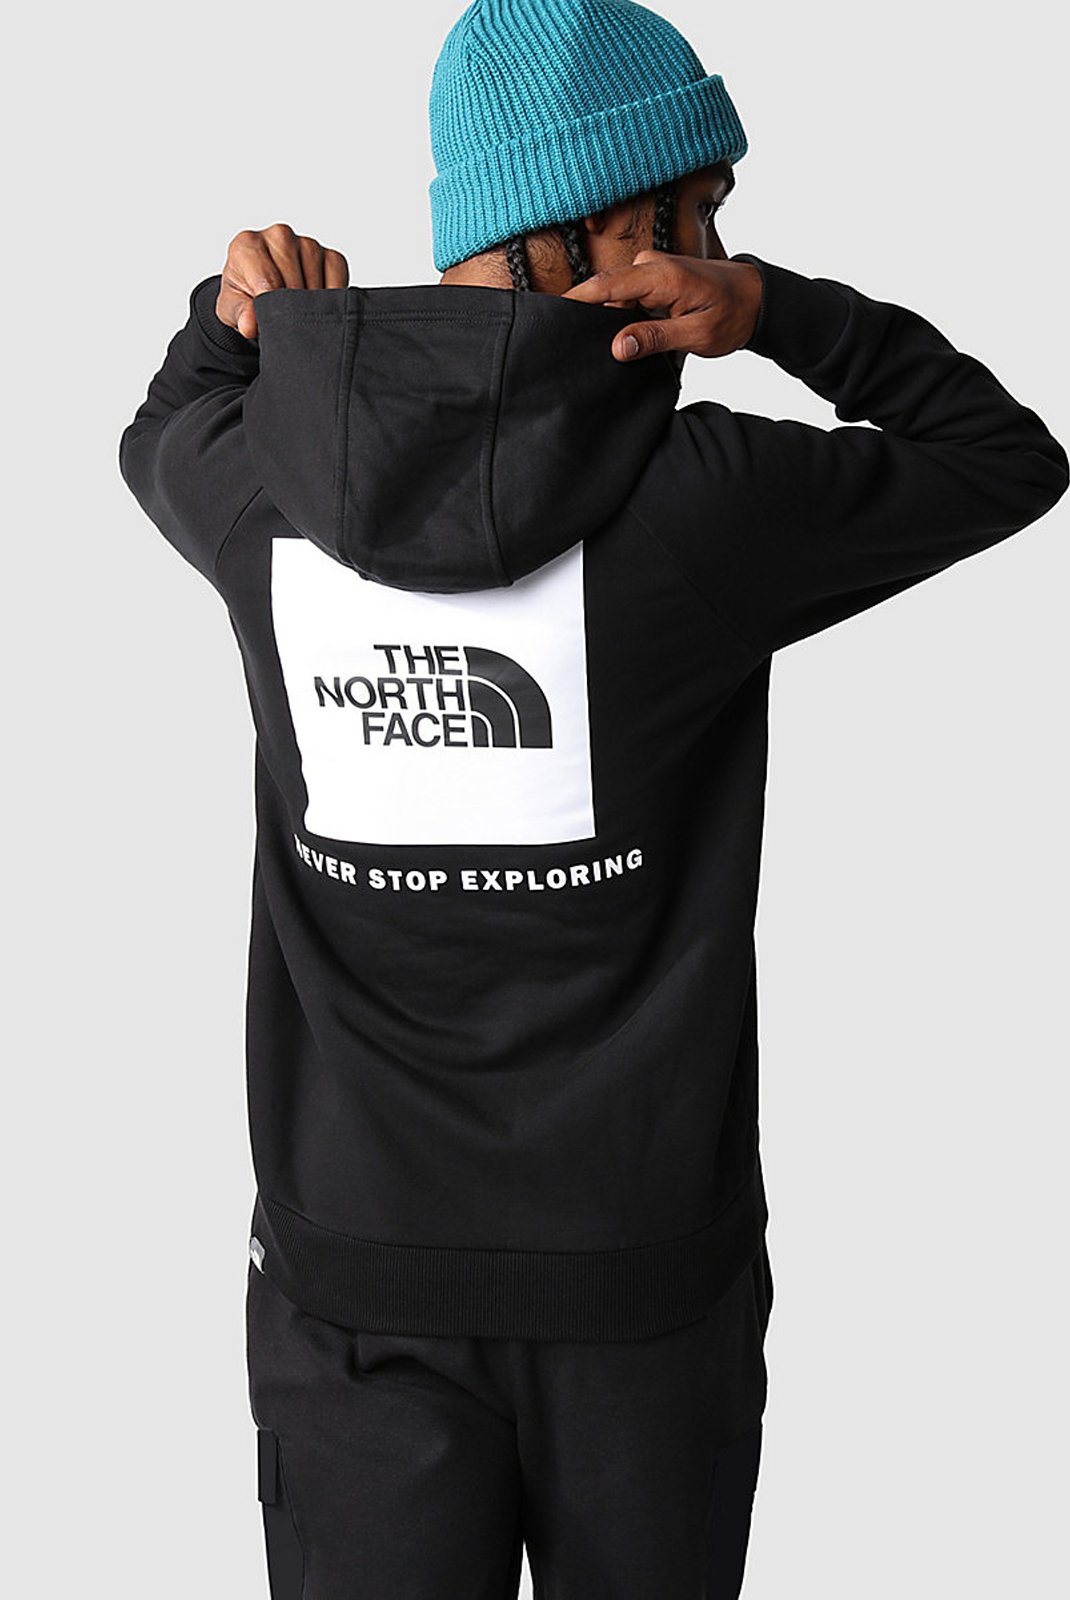 Sweatshirts  The North Face NF0A2ZWUKY41 BLACK